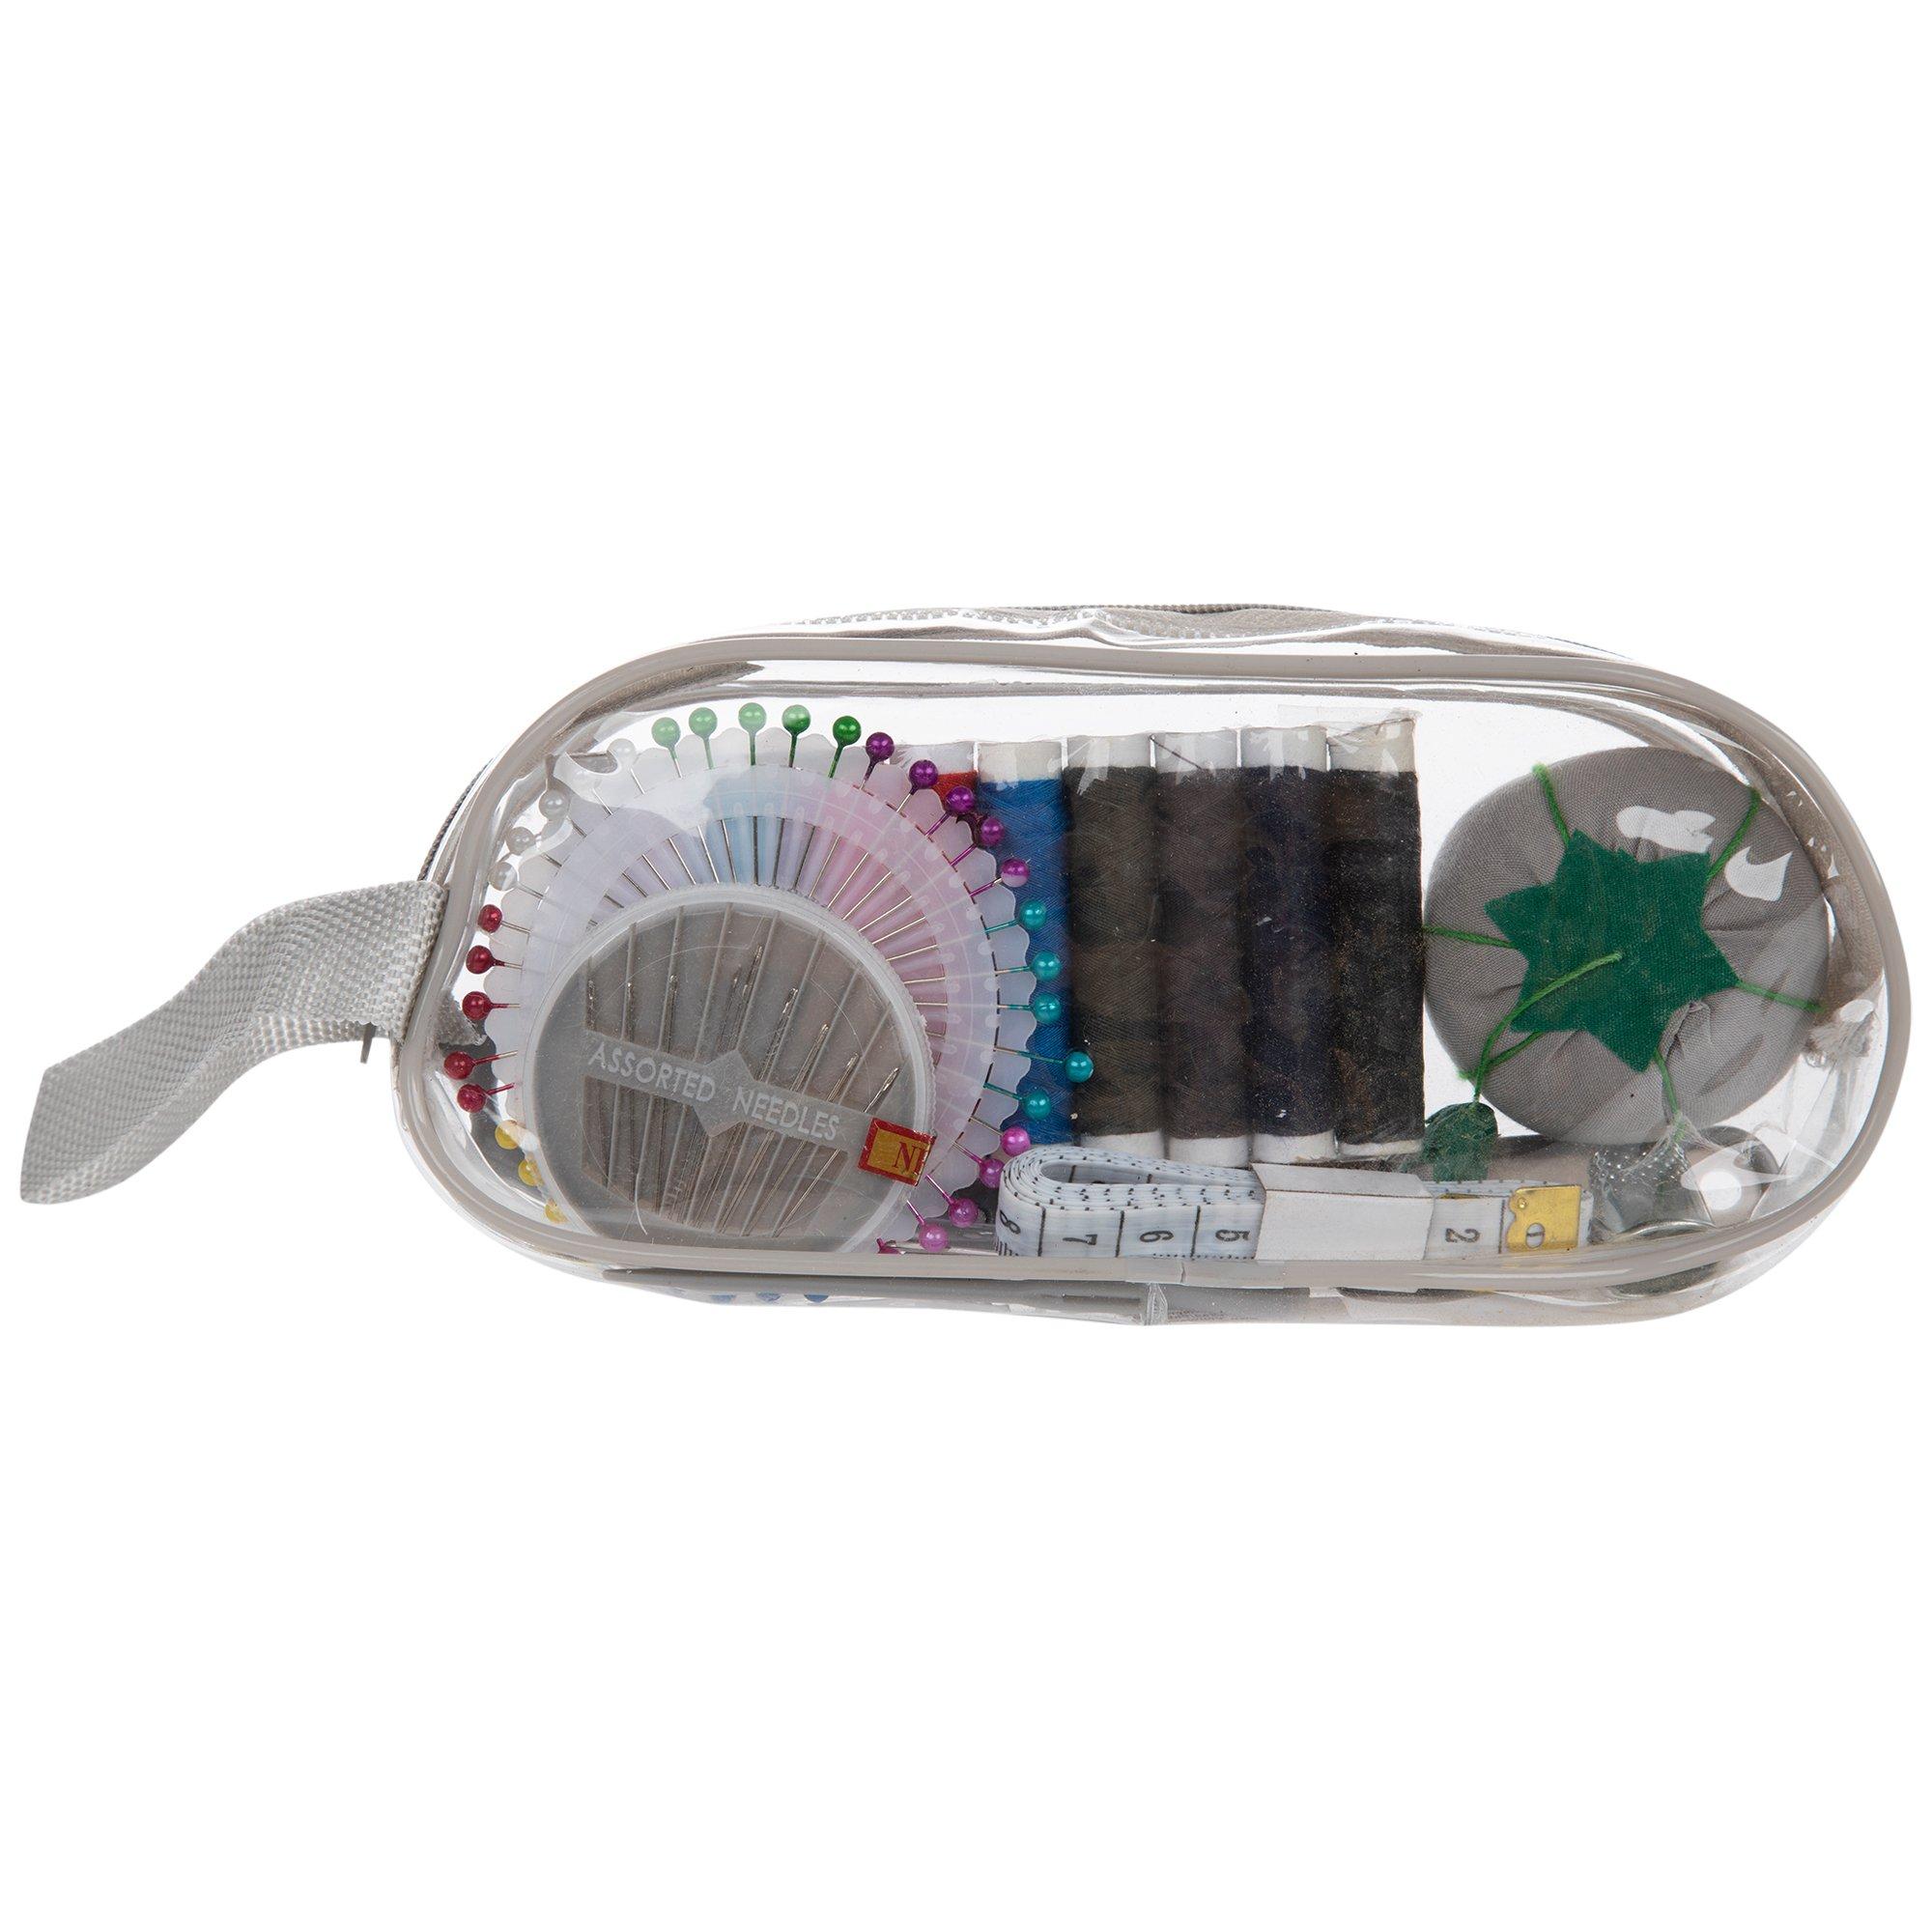 Sewing Kit with Carrying Case, 126 Pcs Sewing Supplies for Home